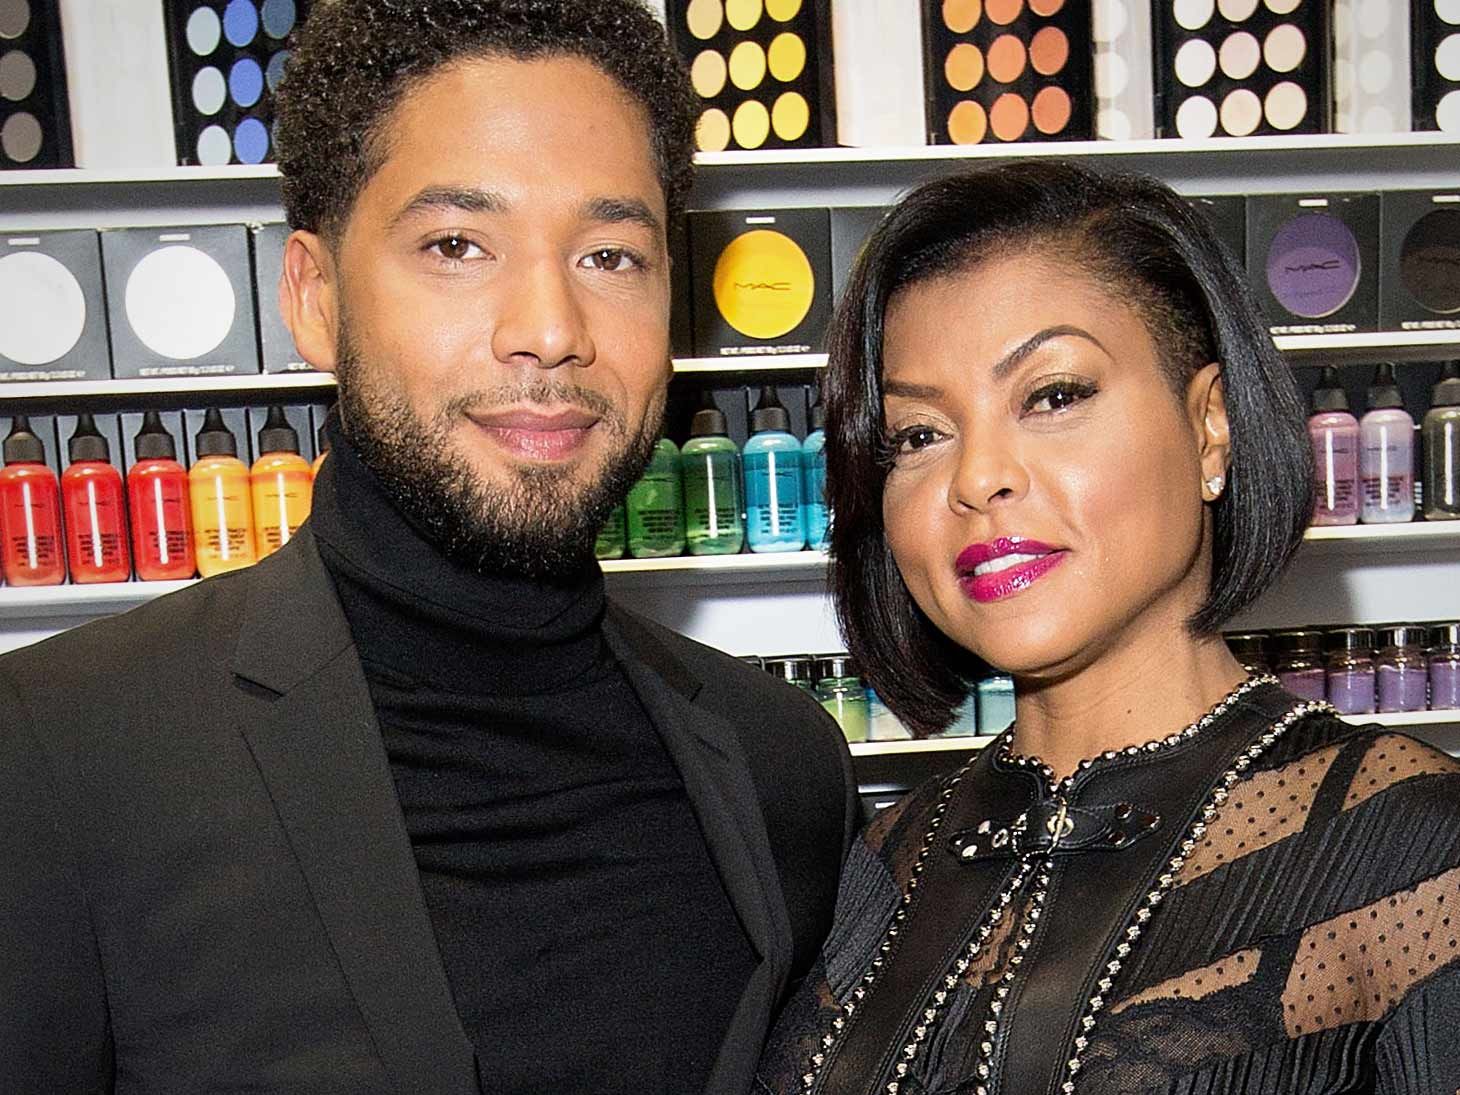 Taraji P. Henson Outraged Over Jussie Smollett Attack: 'My Baby is Resilient'